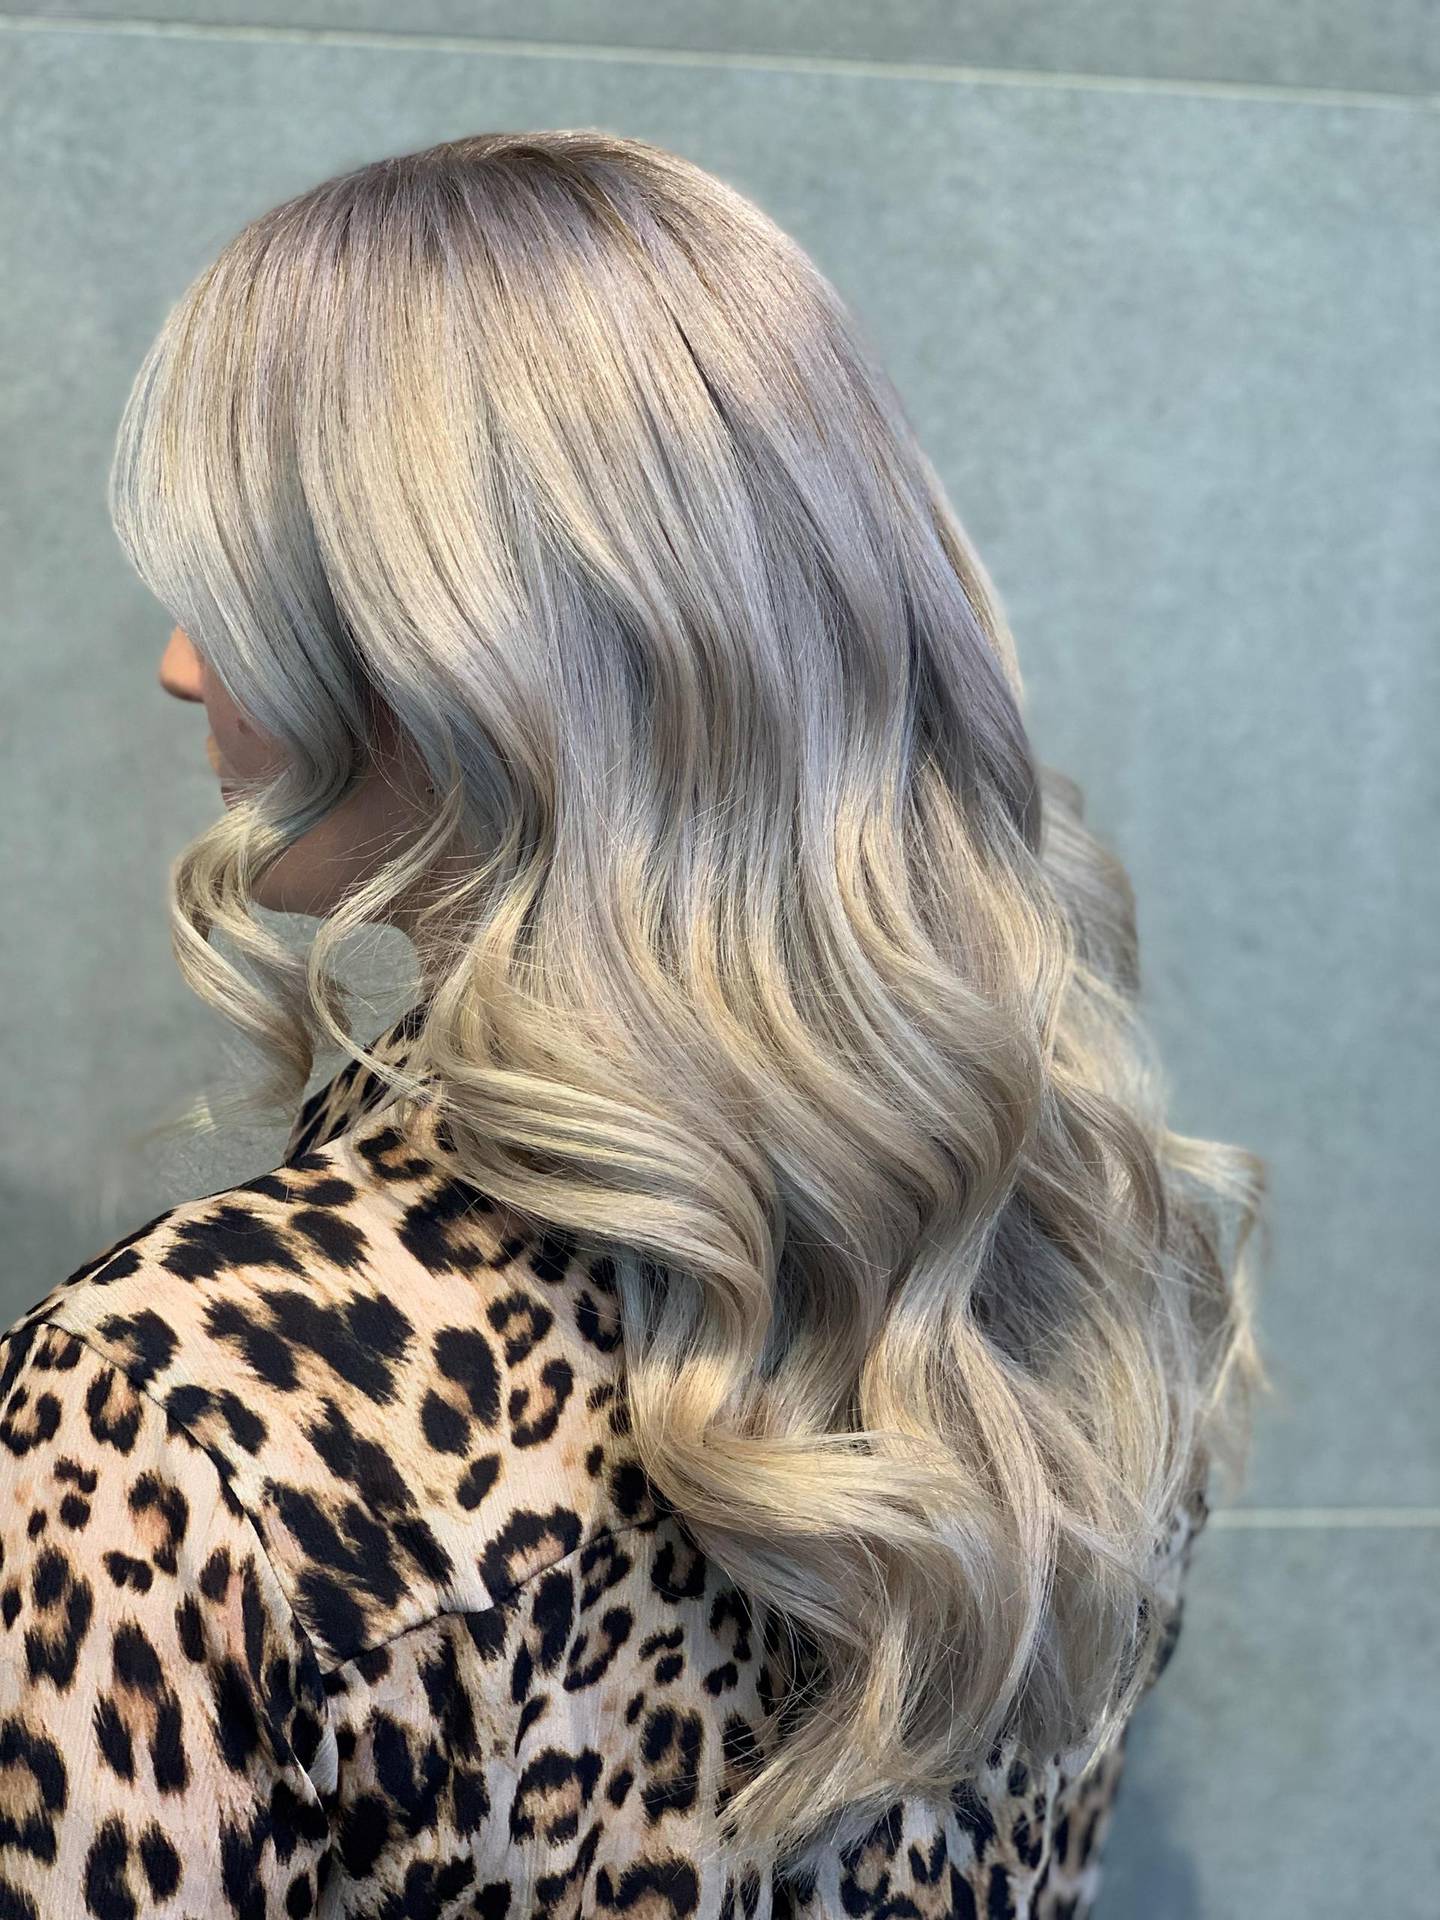 Balayage highlights, which are applied away from the skin and scalp, are safe to get while pregnant. Photo: Headkase, Dubai